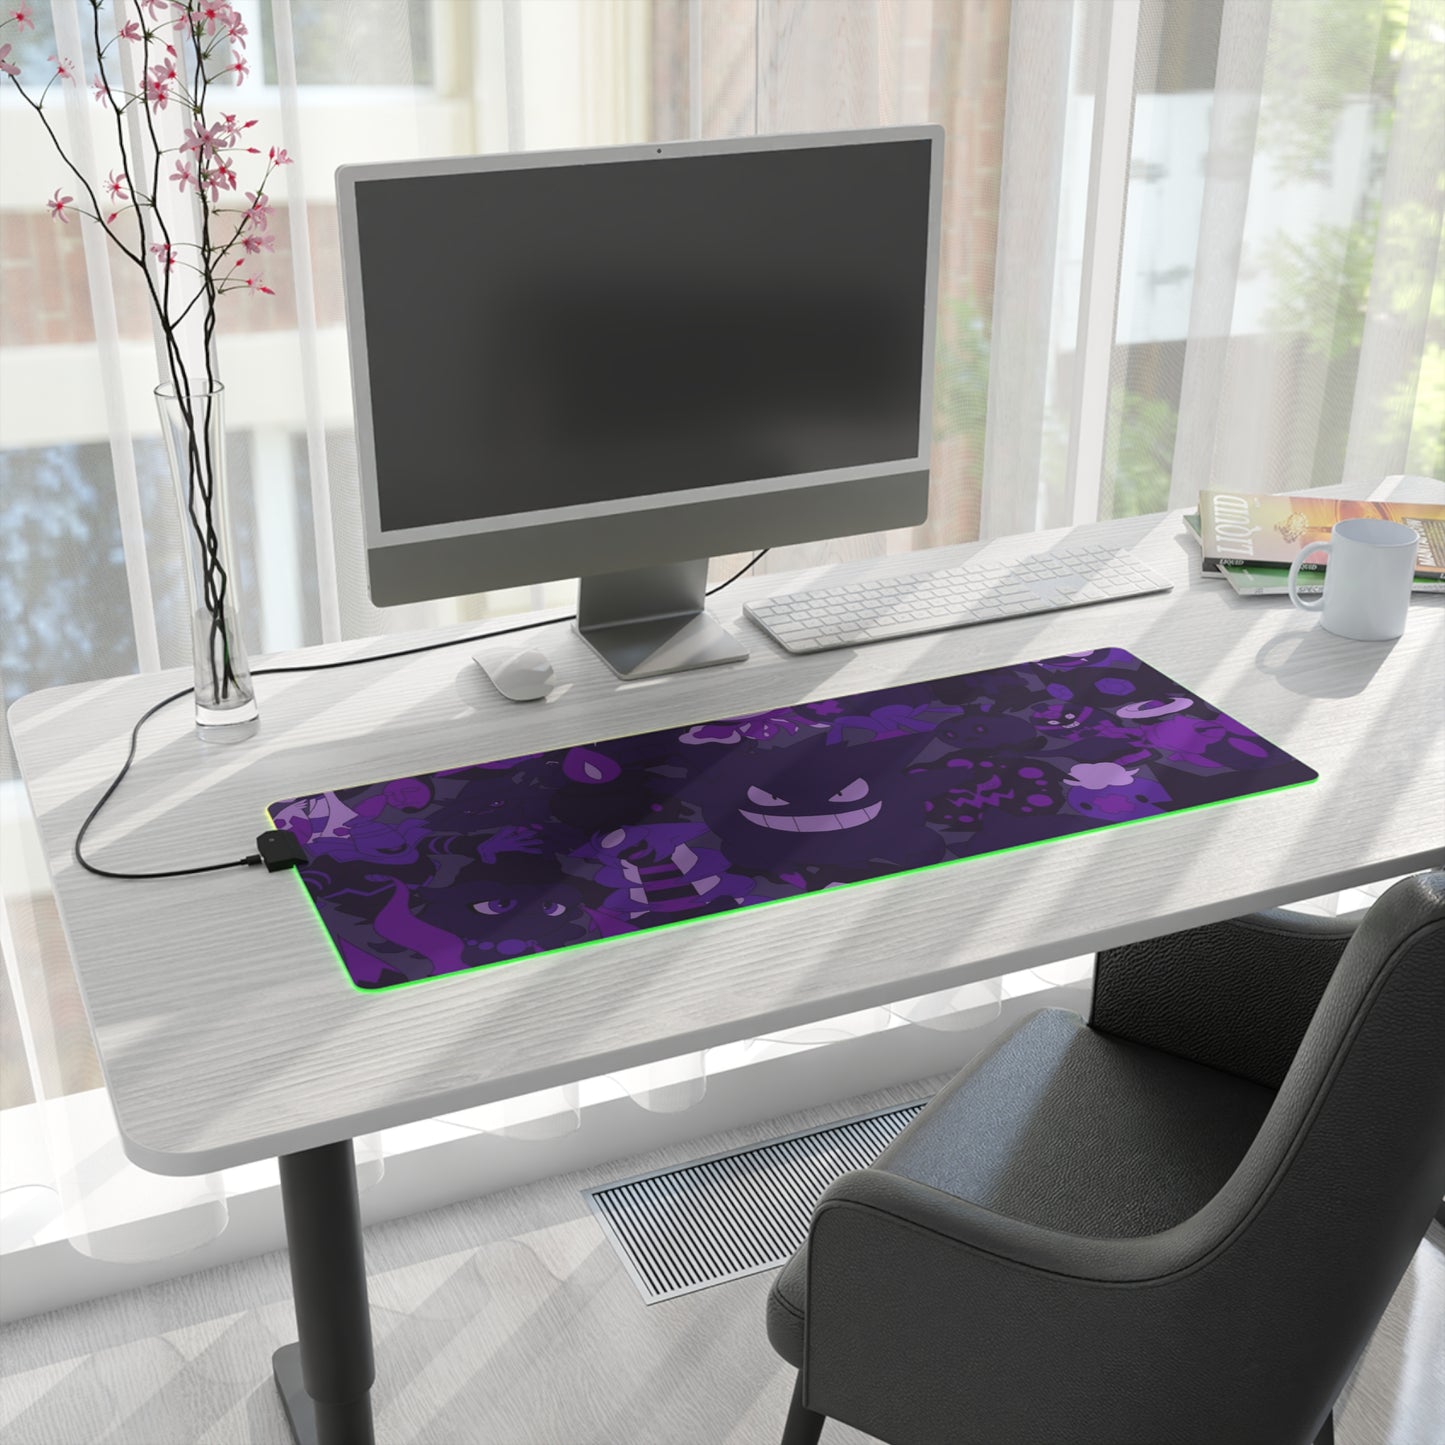 Gengarr LED Gaming Mouse Pad